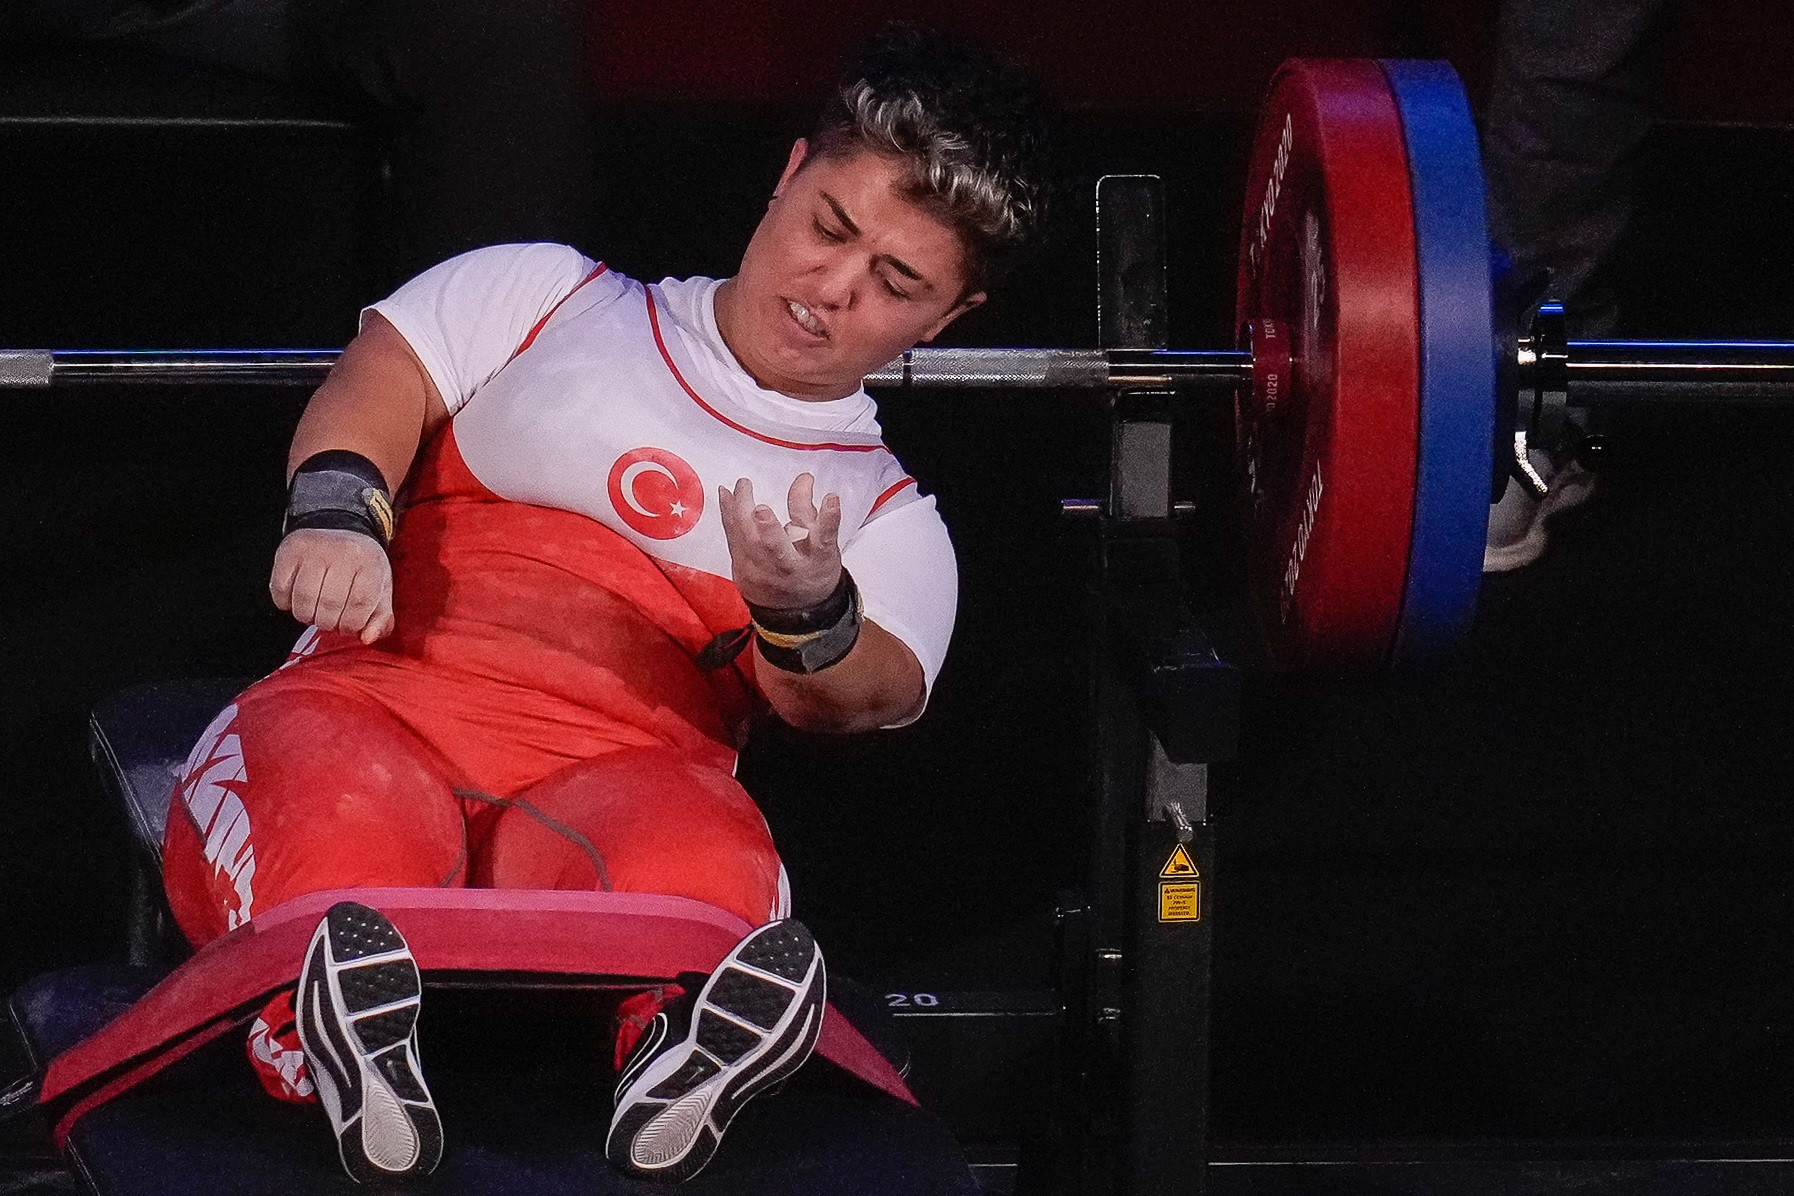 Para powerlifting is one of the sports that Turkey plan to include at the 2027 European Para Championships should they secure the hosting rights ©Getty Images